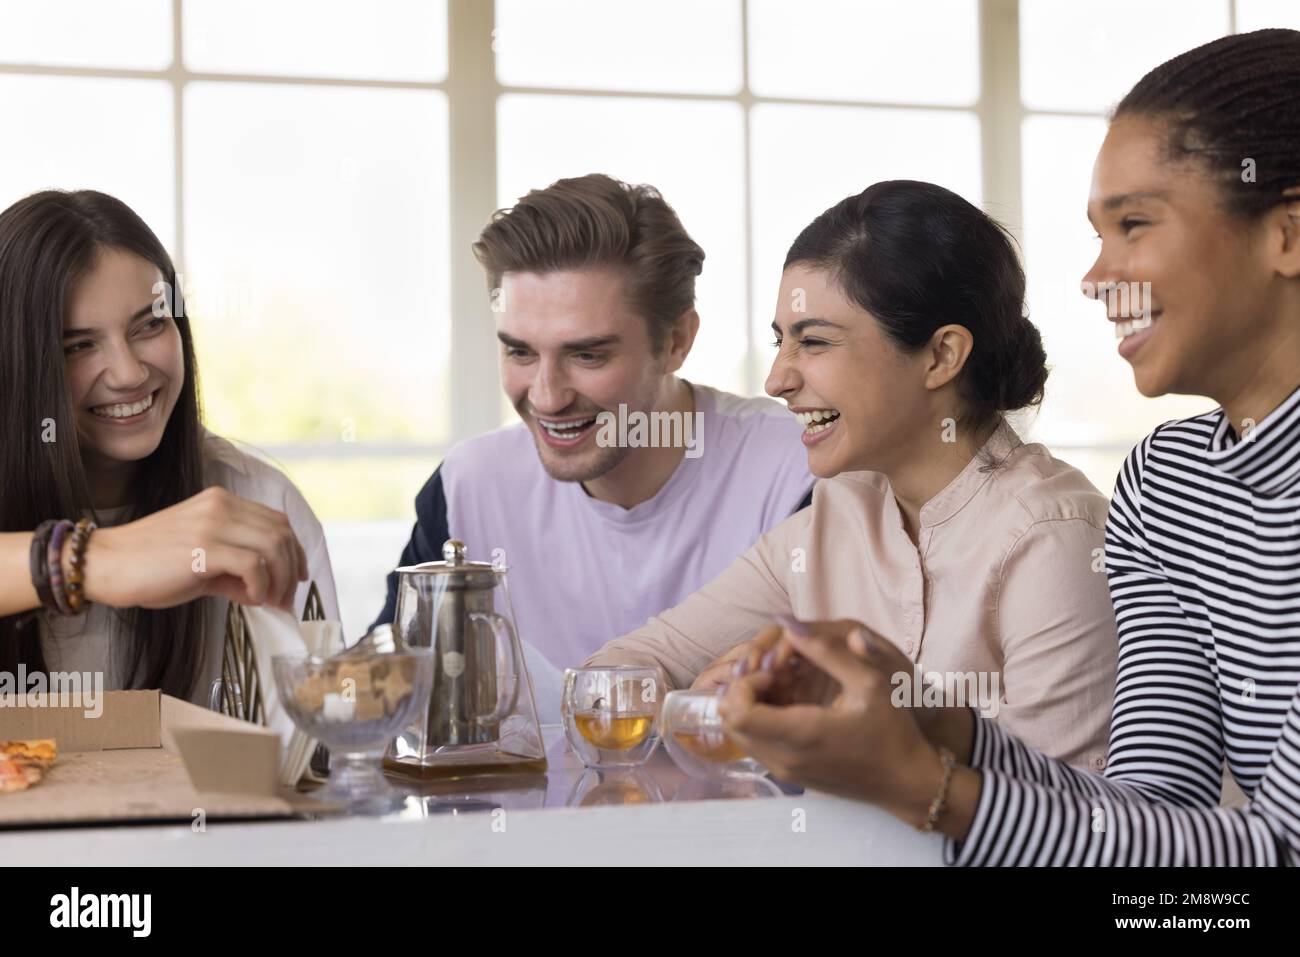 Diverse group of young friends gathering at table in cafe Stock Photo